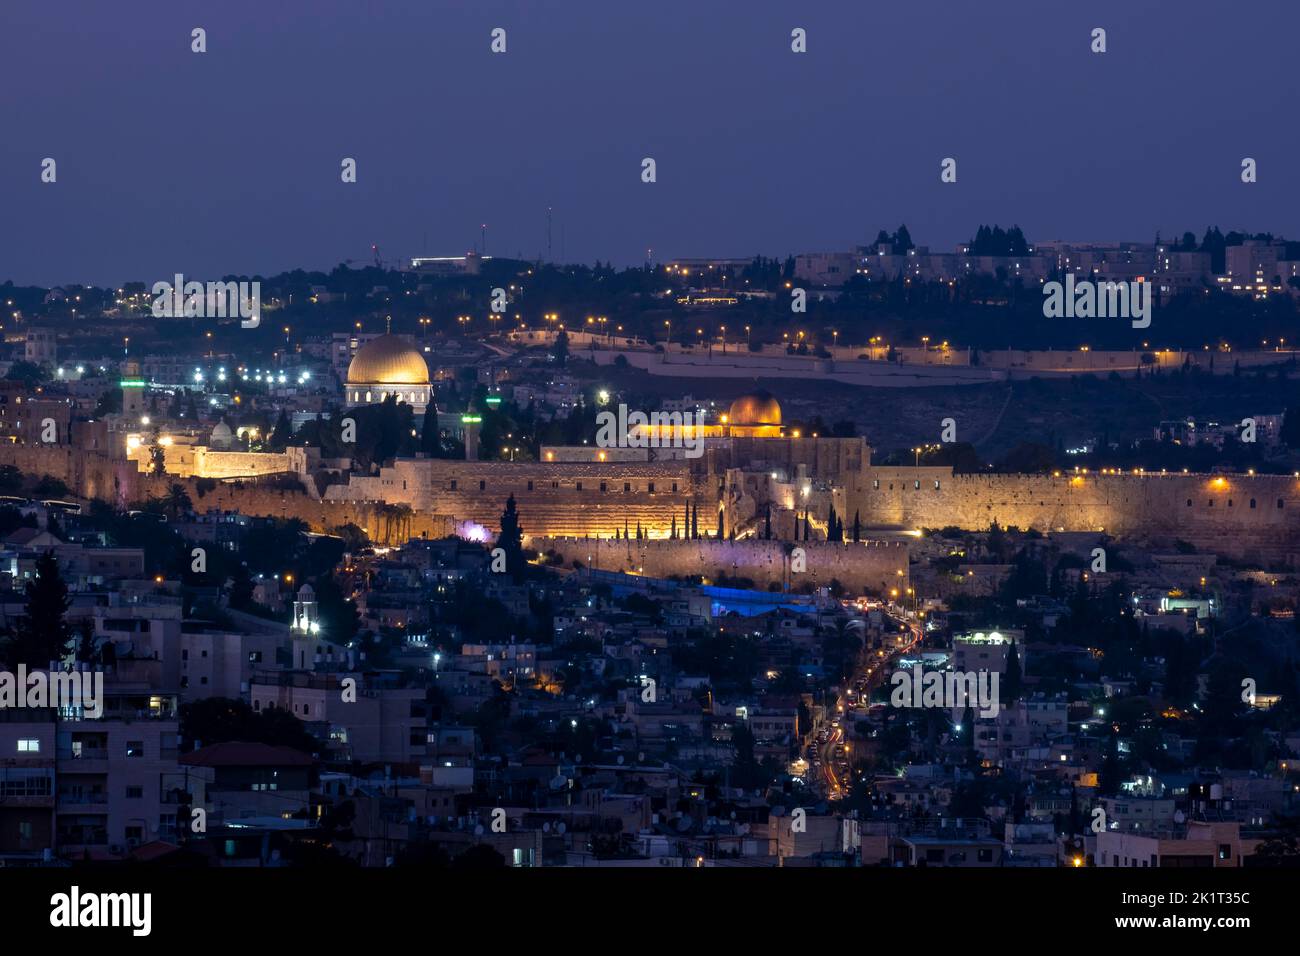 View at twilight of the Dome of the Rock and Al-Aksa Mosque built on top of the Temple Mount, known as the Al Aqsa Compound or Haram esh-Sharif across the Palestinian neighborhood of Silwan in East Jerusalem, Israel Stock Photo